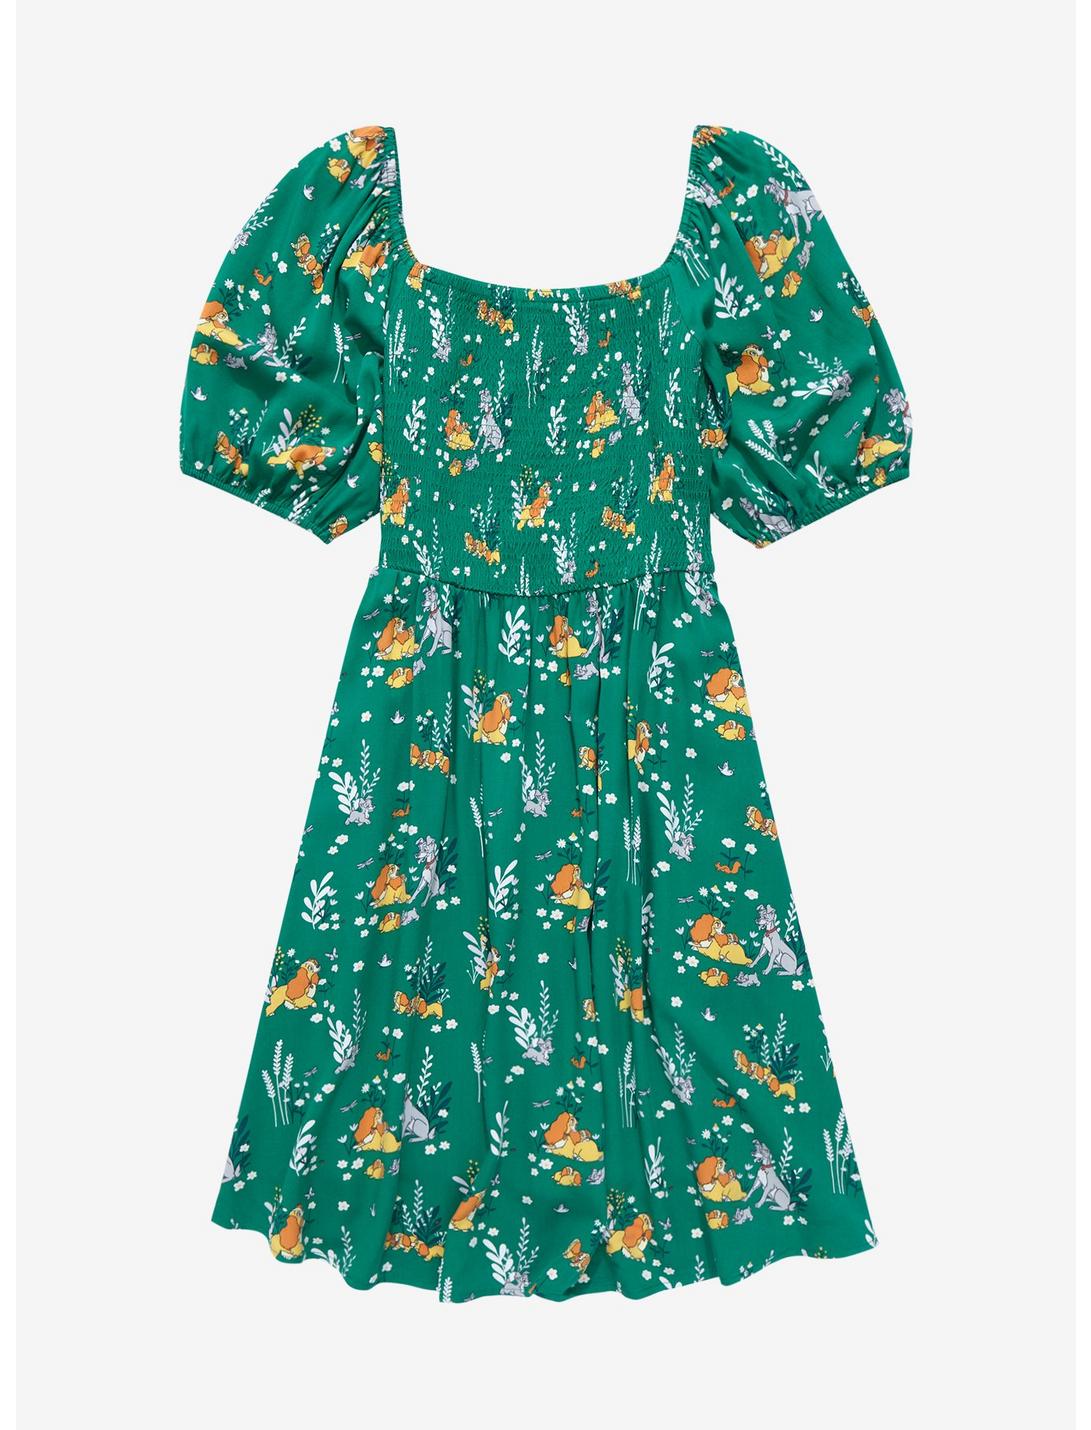 Her Universe Disney Lady and the Tramp Floral Allover Print Smock Dress, MULTI, hi-res